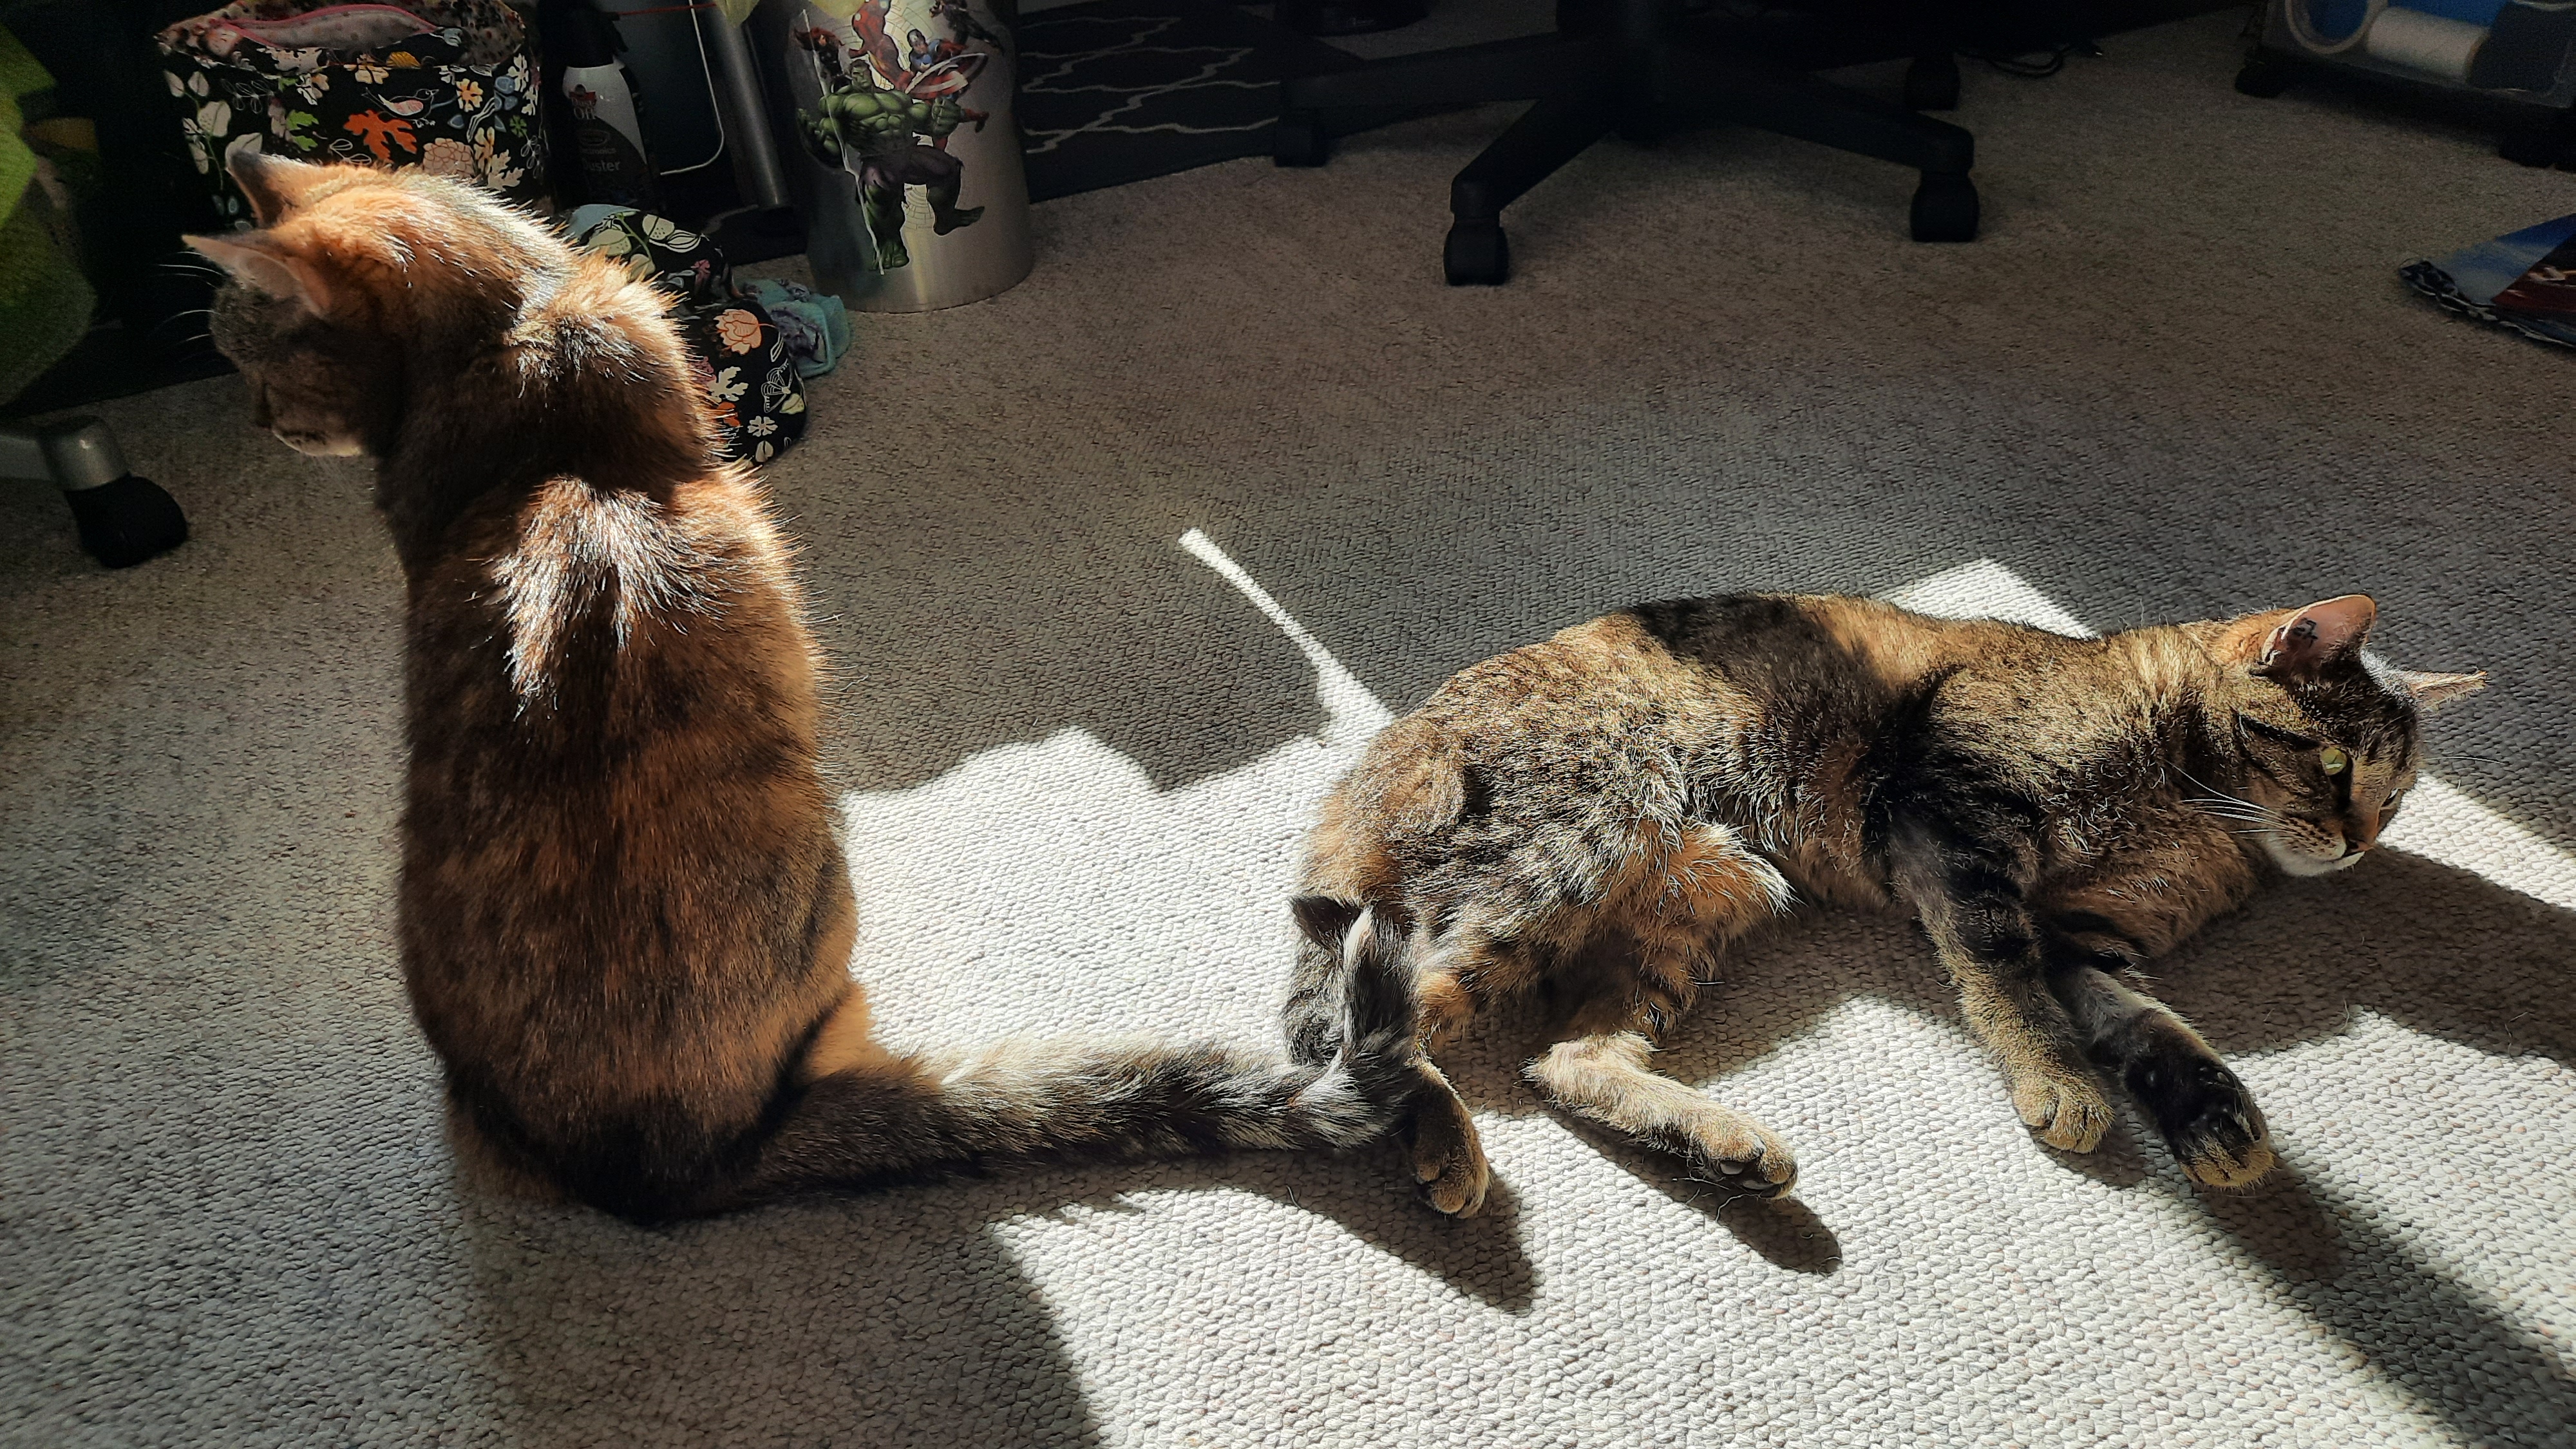 Two cats sitting in the sun. The one on the left is a mottled brown and orange, and the one on the left is a brown tabby. Behind the cat on the left a knitting bag is visible.